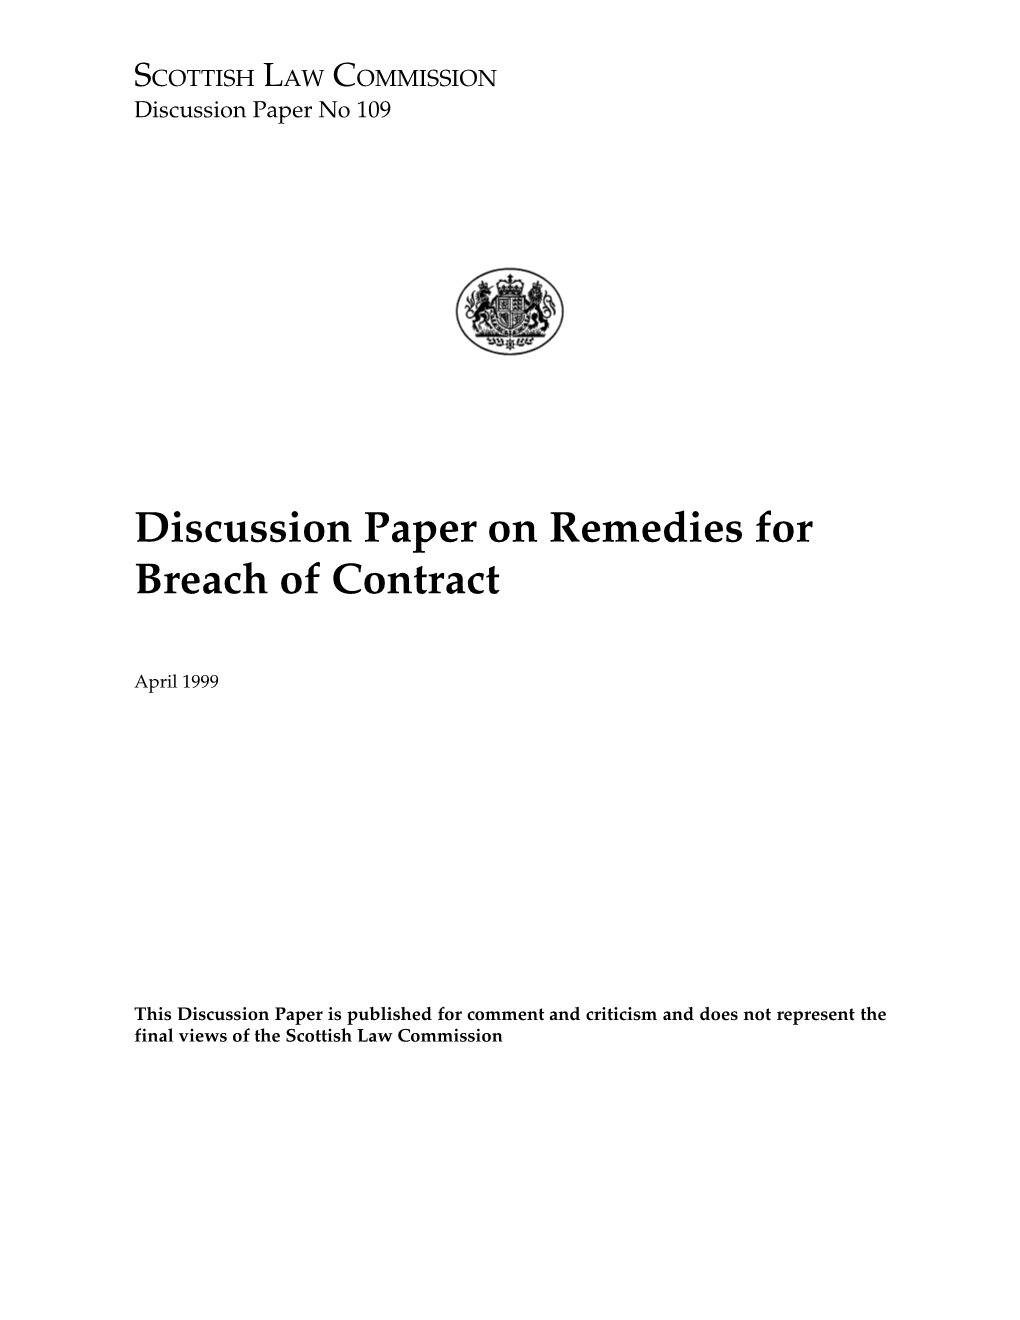 Discussion Paper on Remedies for Breach of Contract